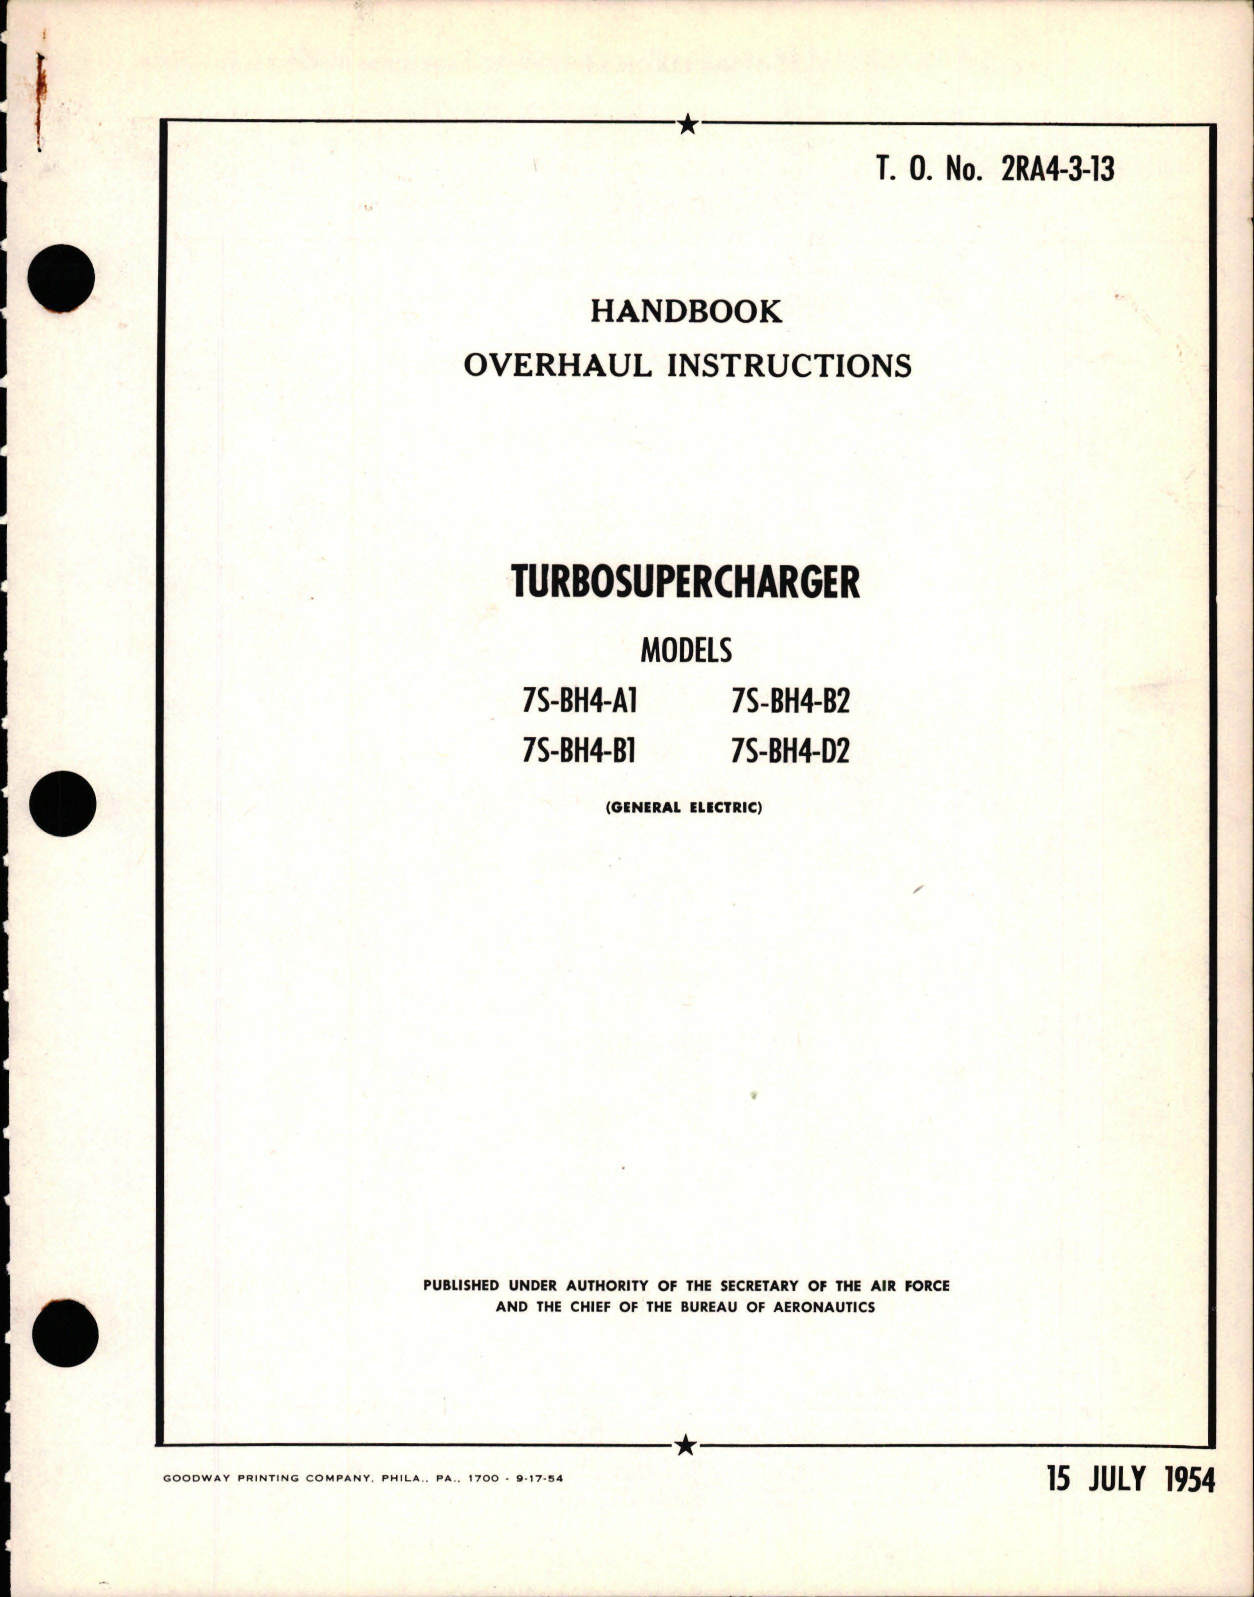 Sample page 1 from AirCorps Library document: Overhaul Instructions for Turbosupercharger - Models 7S-BH4-A1, 7S-BH4-B1, 7S-BH4-B2, and 7S-BH4-D2